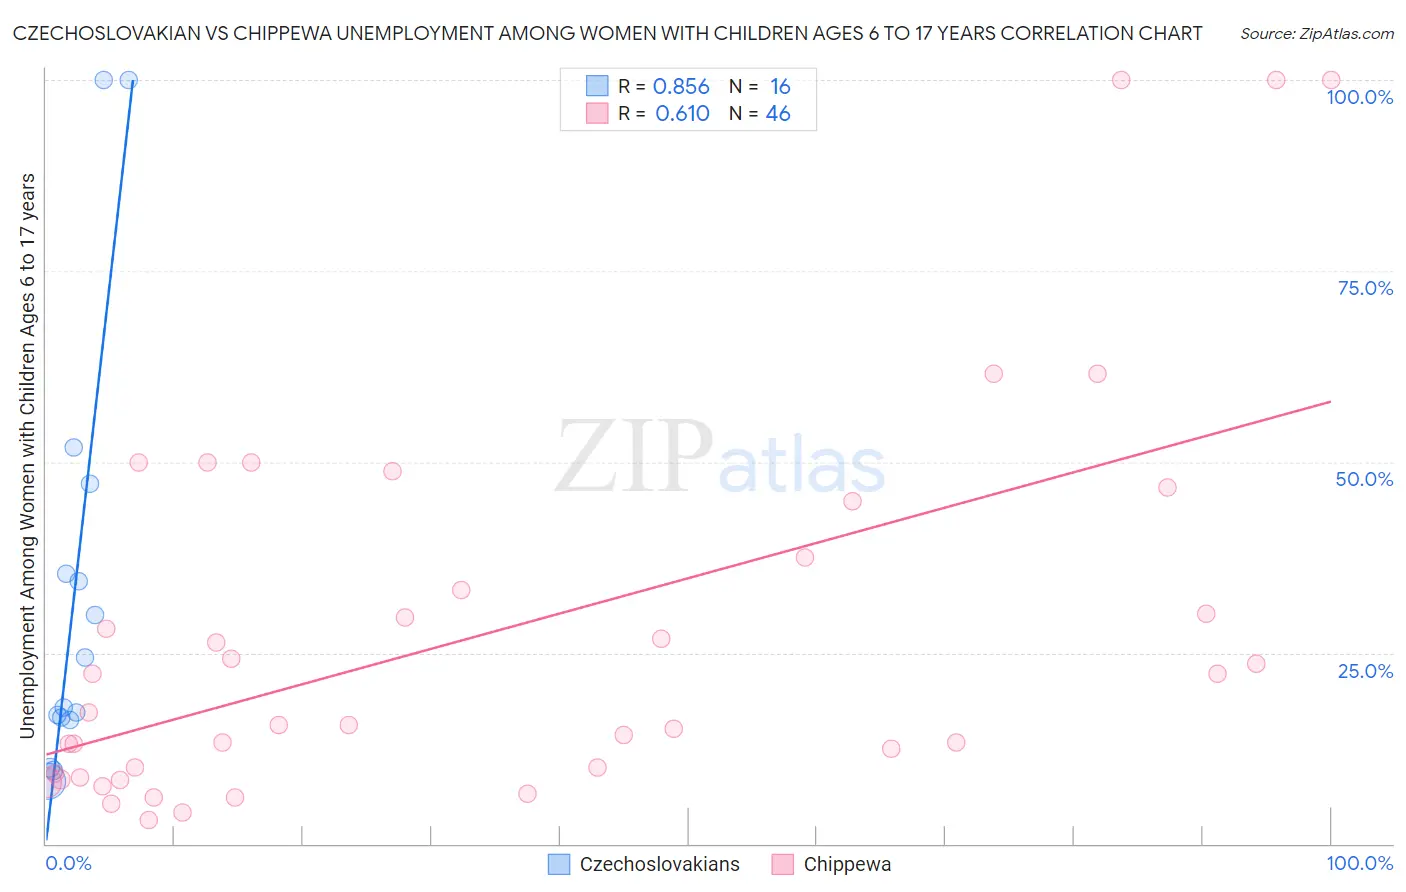 Czechoslovakian vs Chippewa Unemployment Among Women with Children Ages 6 to 17 years